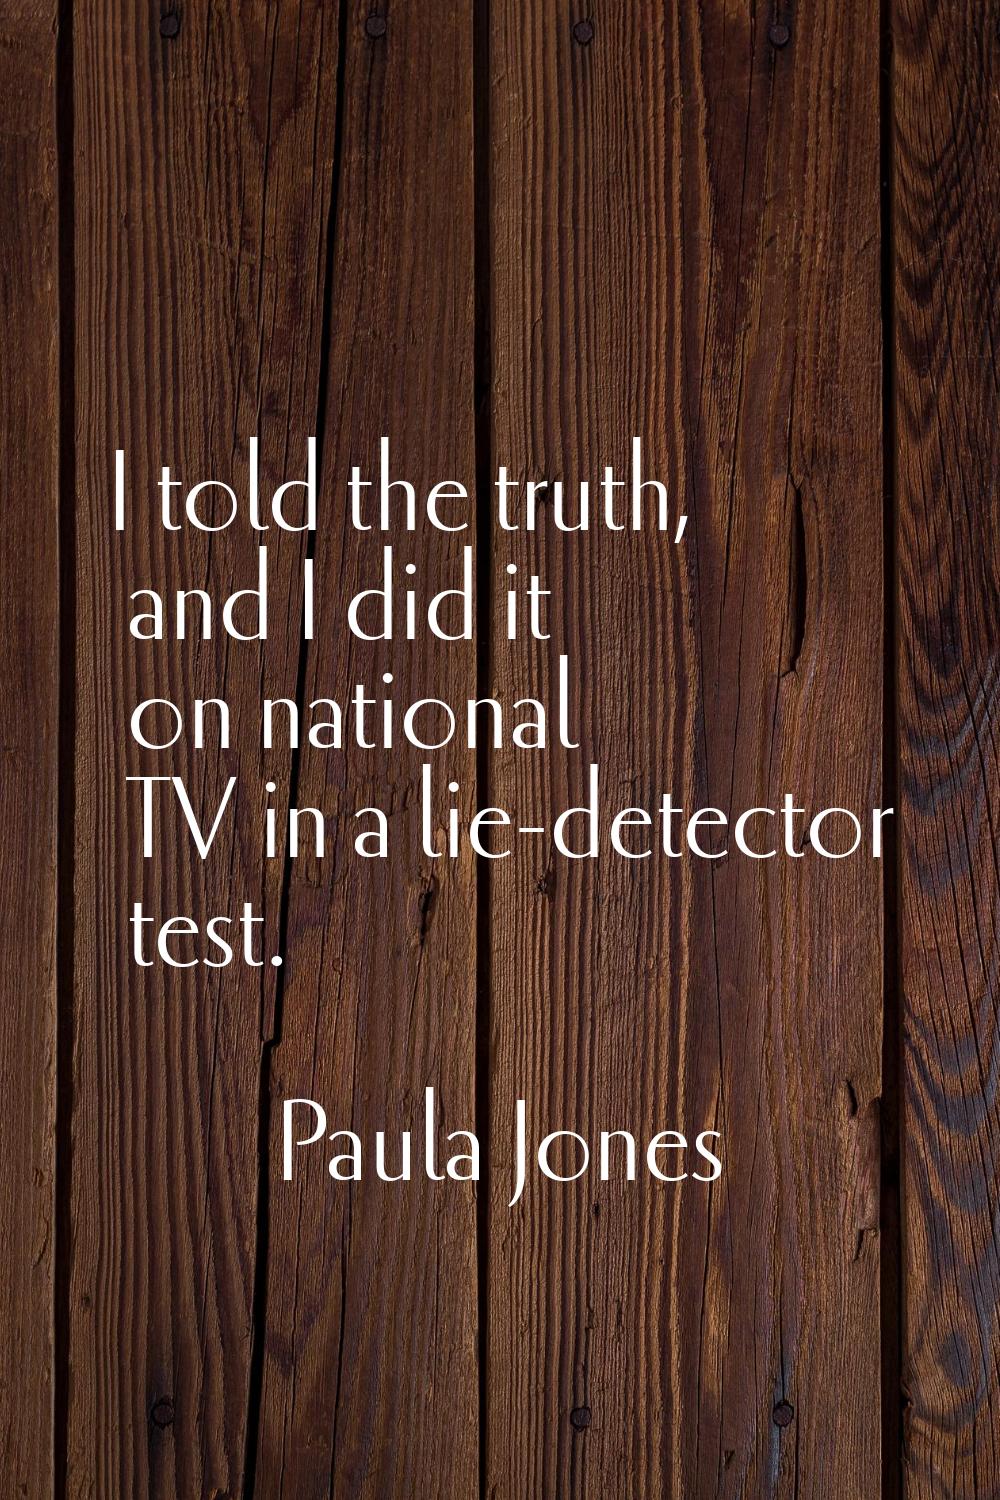 I told the truth, and I did it on national TV in a lie-detector test.